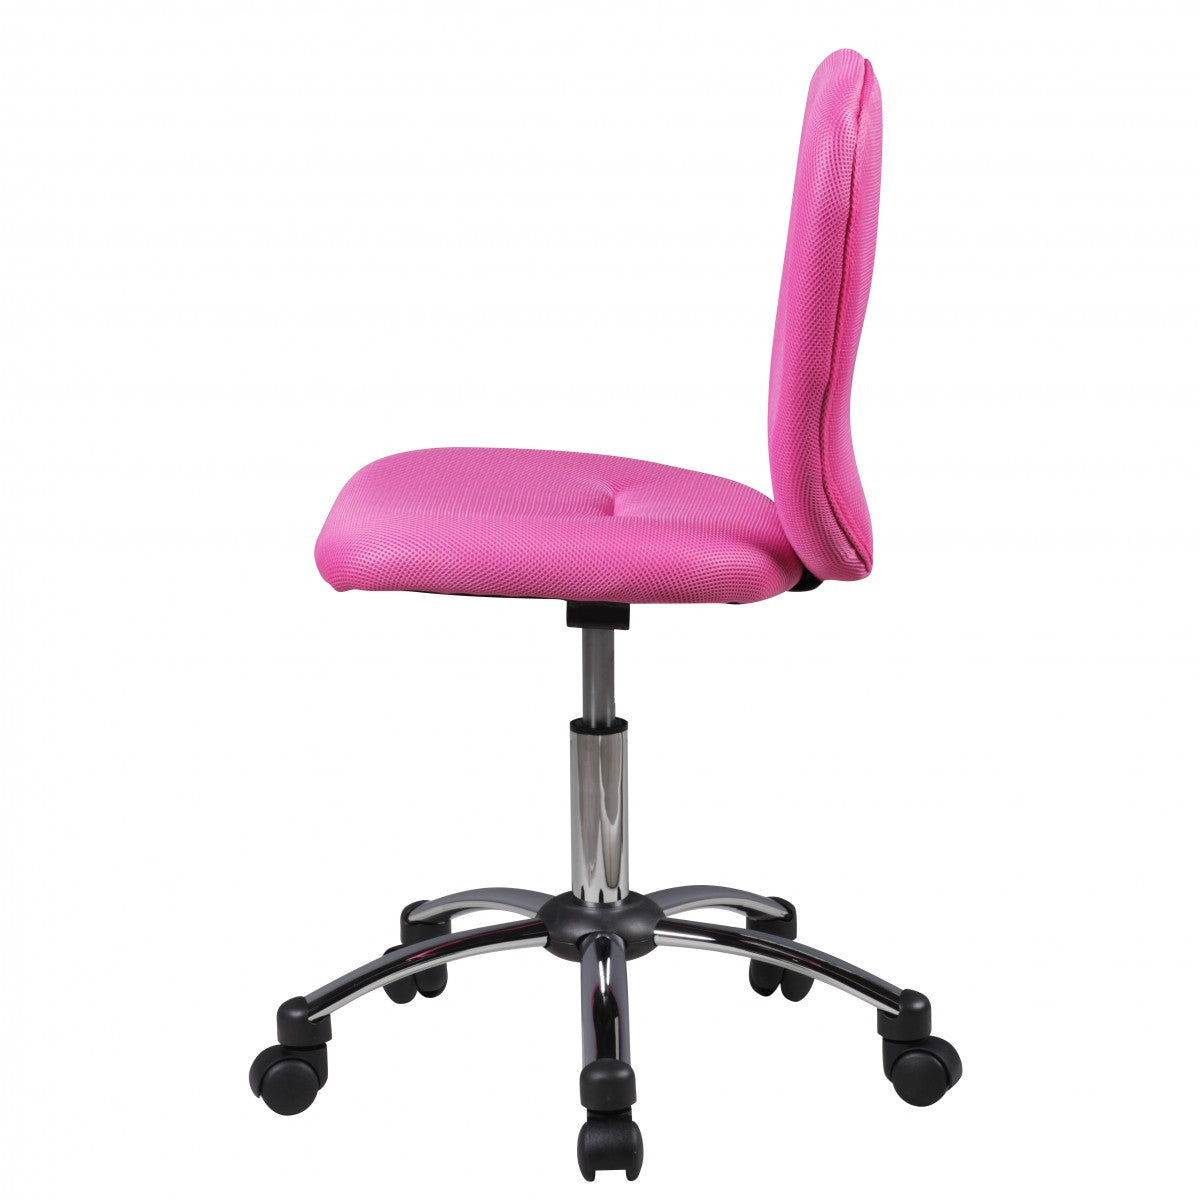 Nancy's Topeka Office Chair for Children - Swivel chair - Office chair - High chair - Adjustable - Black/Green/Blue/Pink